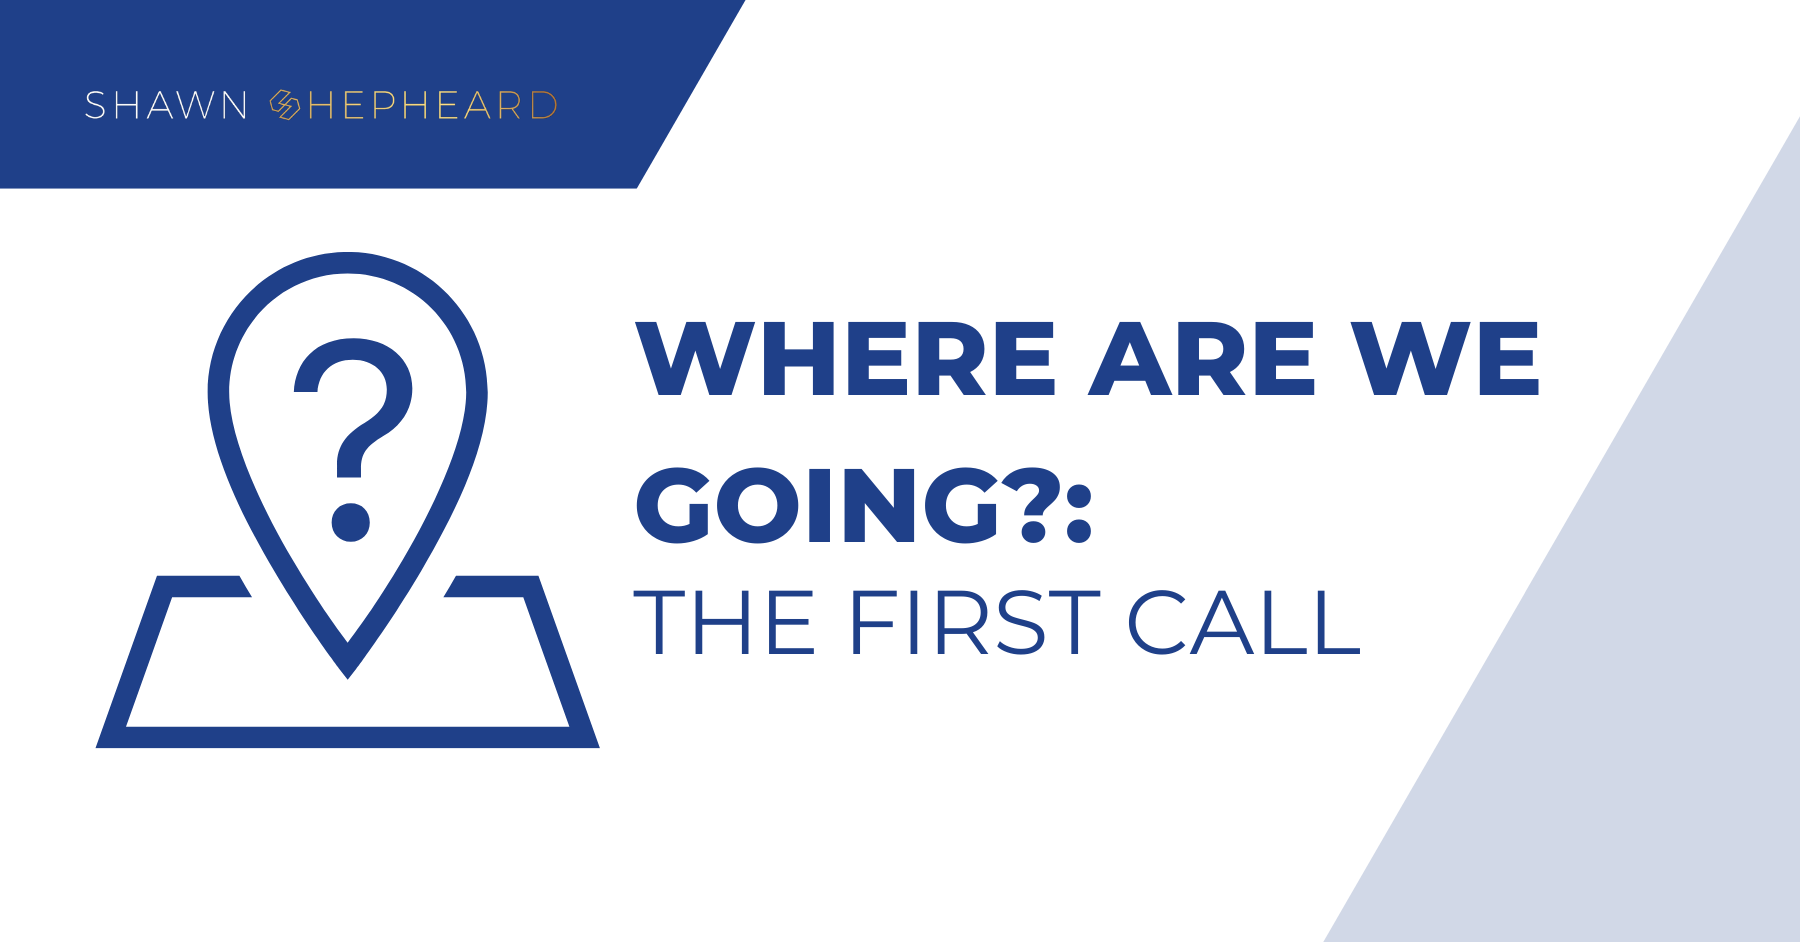 Where are we going?: The first call